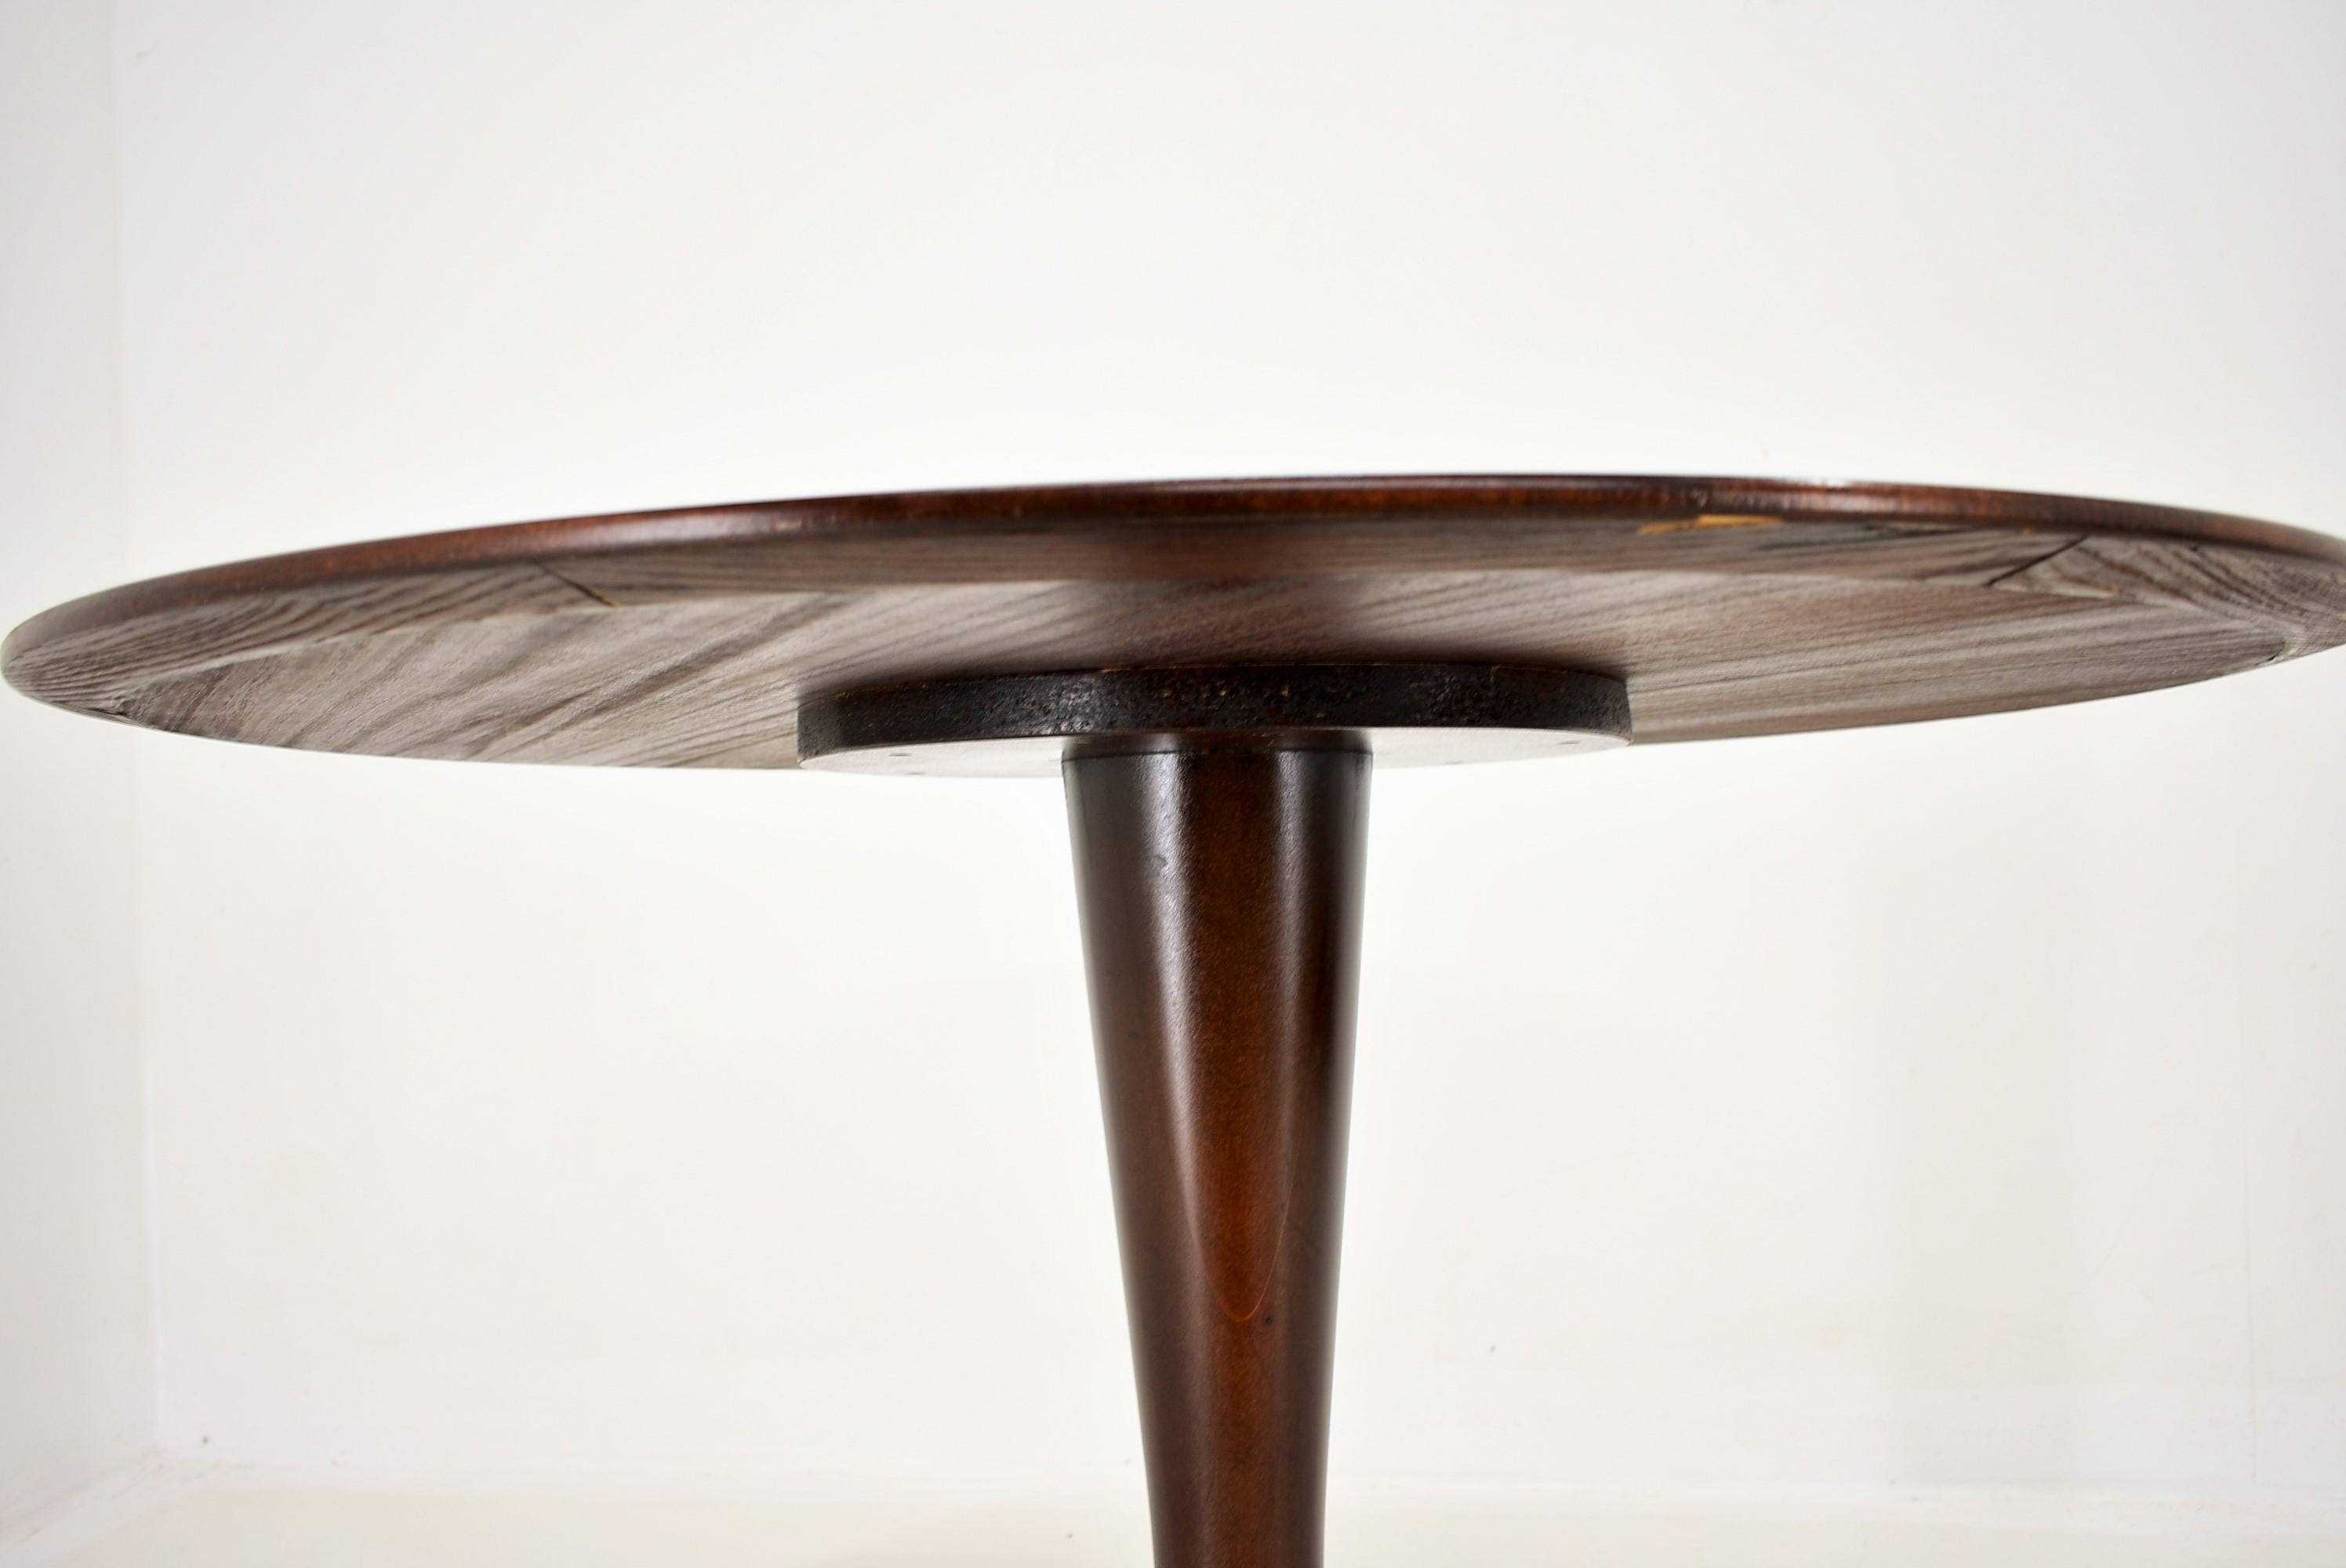 Czech Designed Mahogany Round Dining Table, 1969